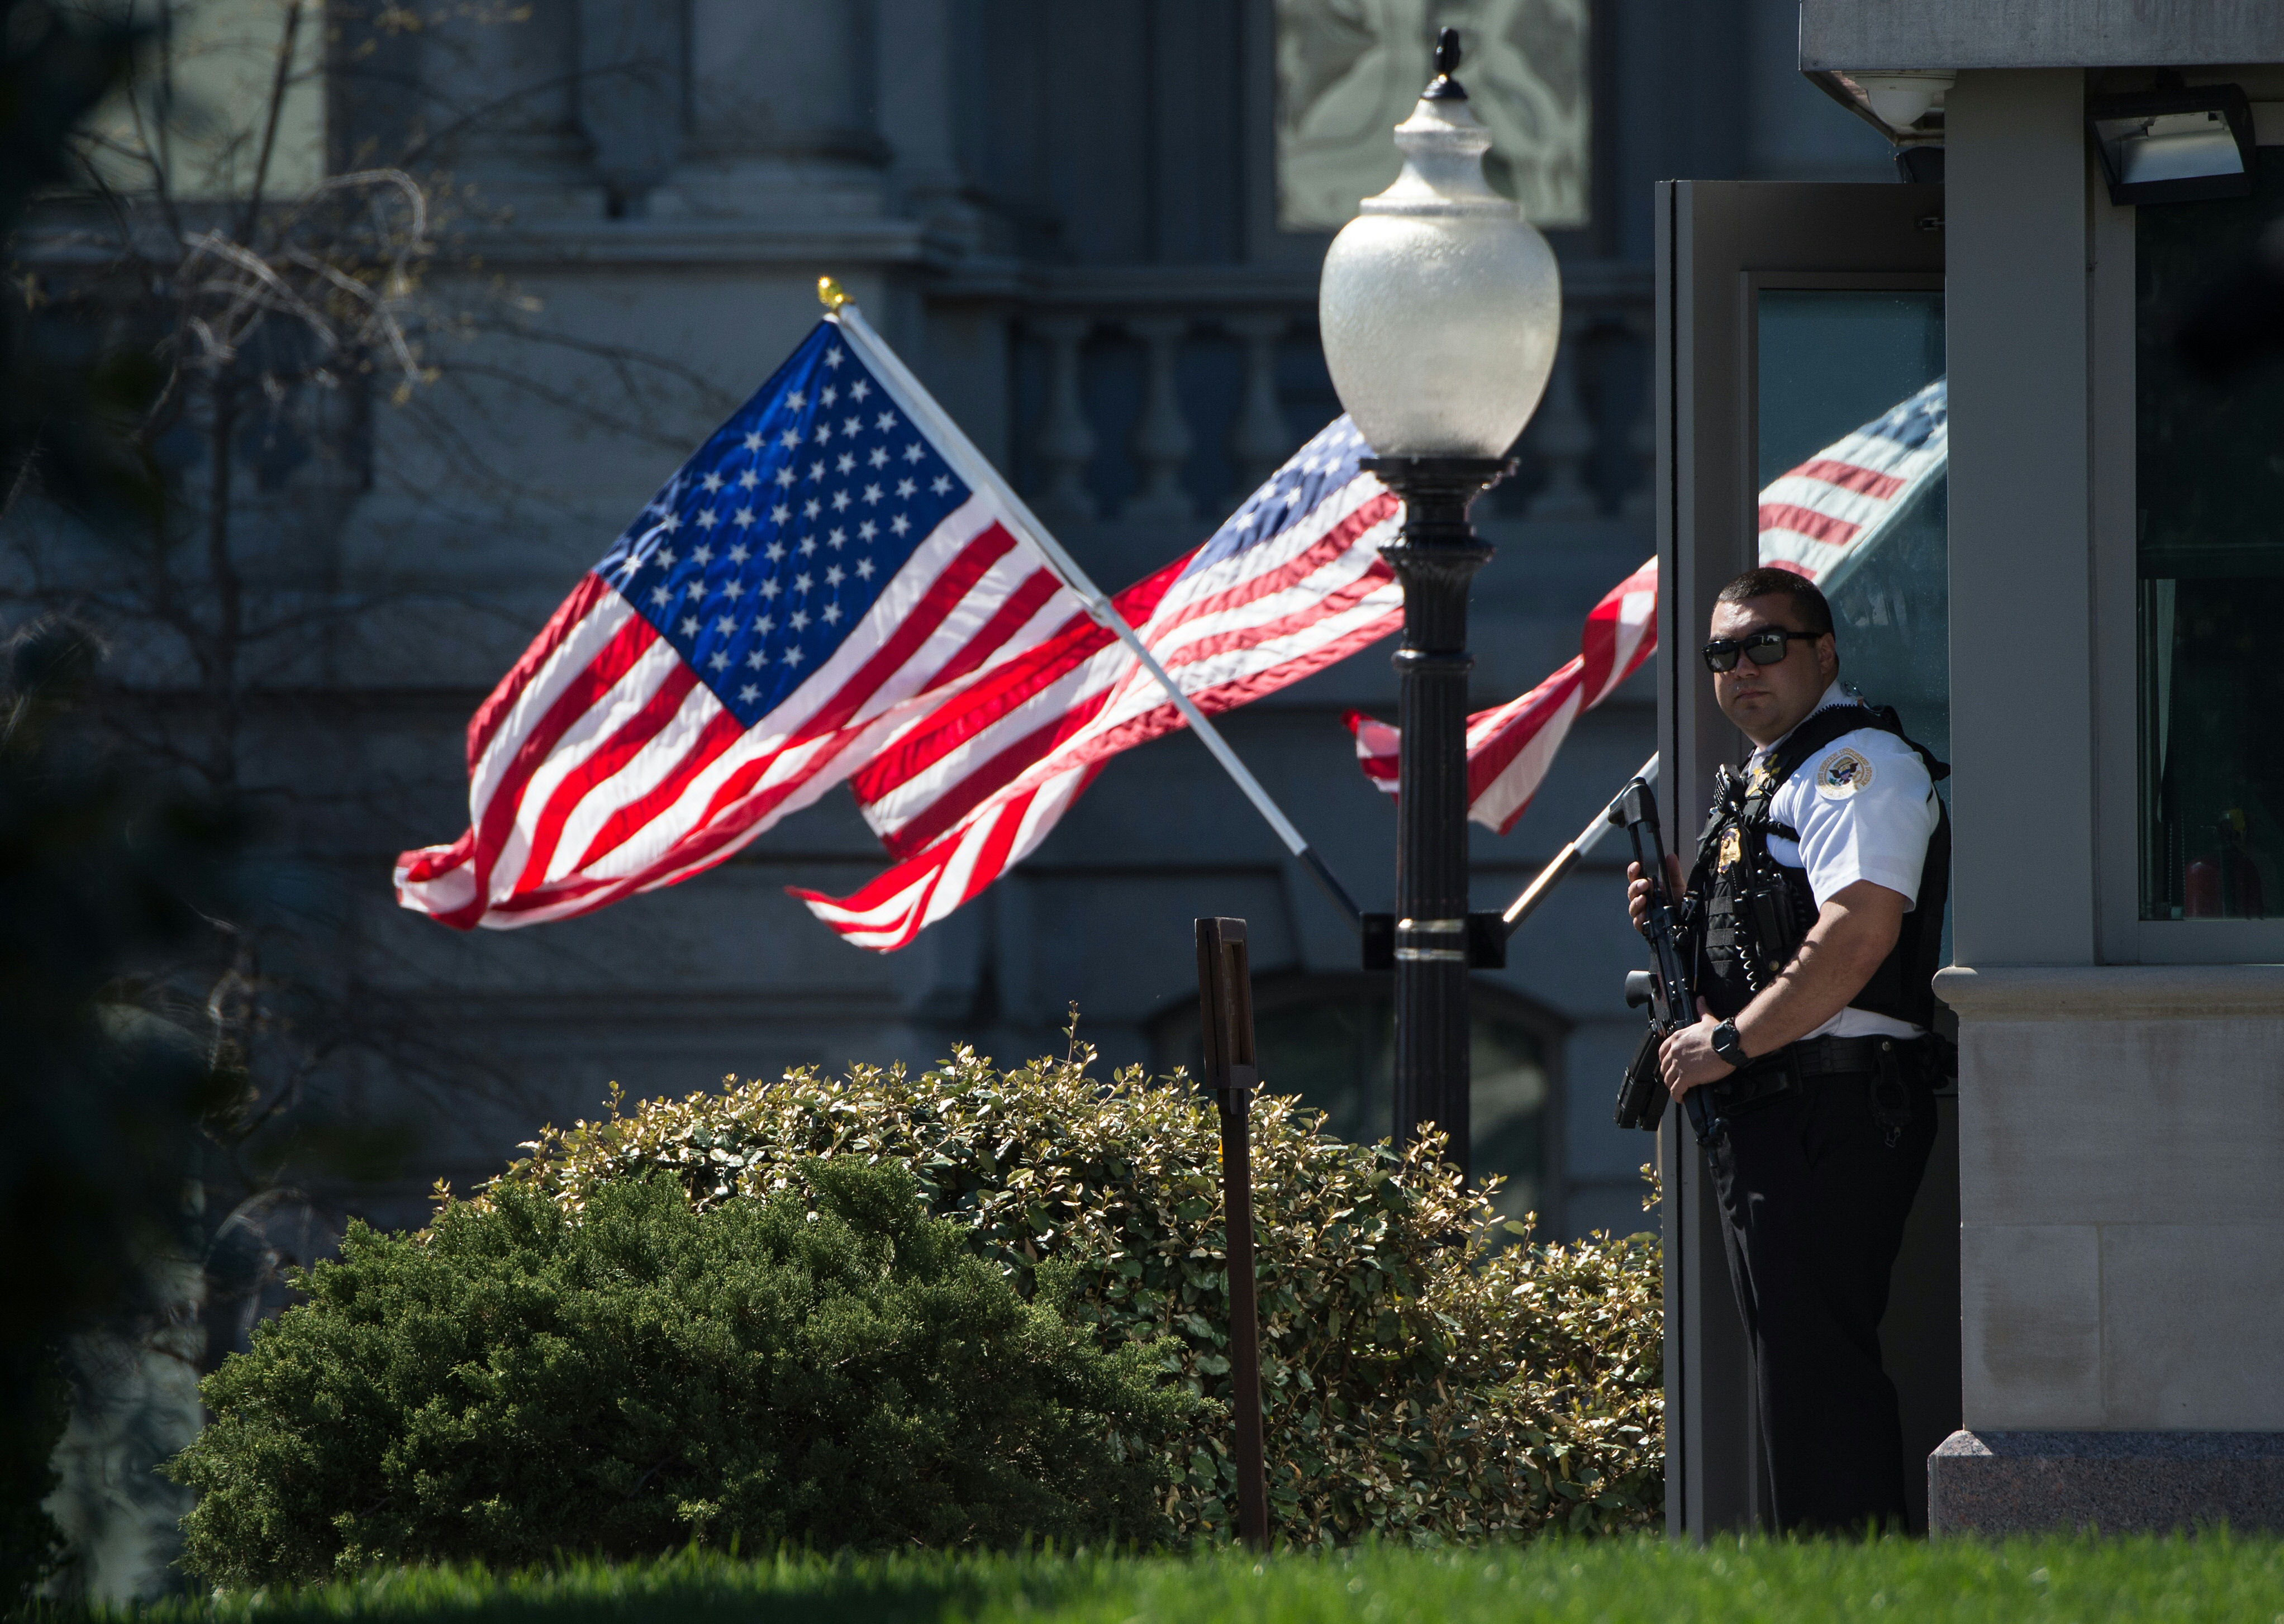 A US Secret Service agent stands guard at the White House in Washington, DC, on March 28, 2016. (Getty)